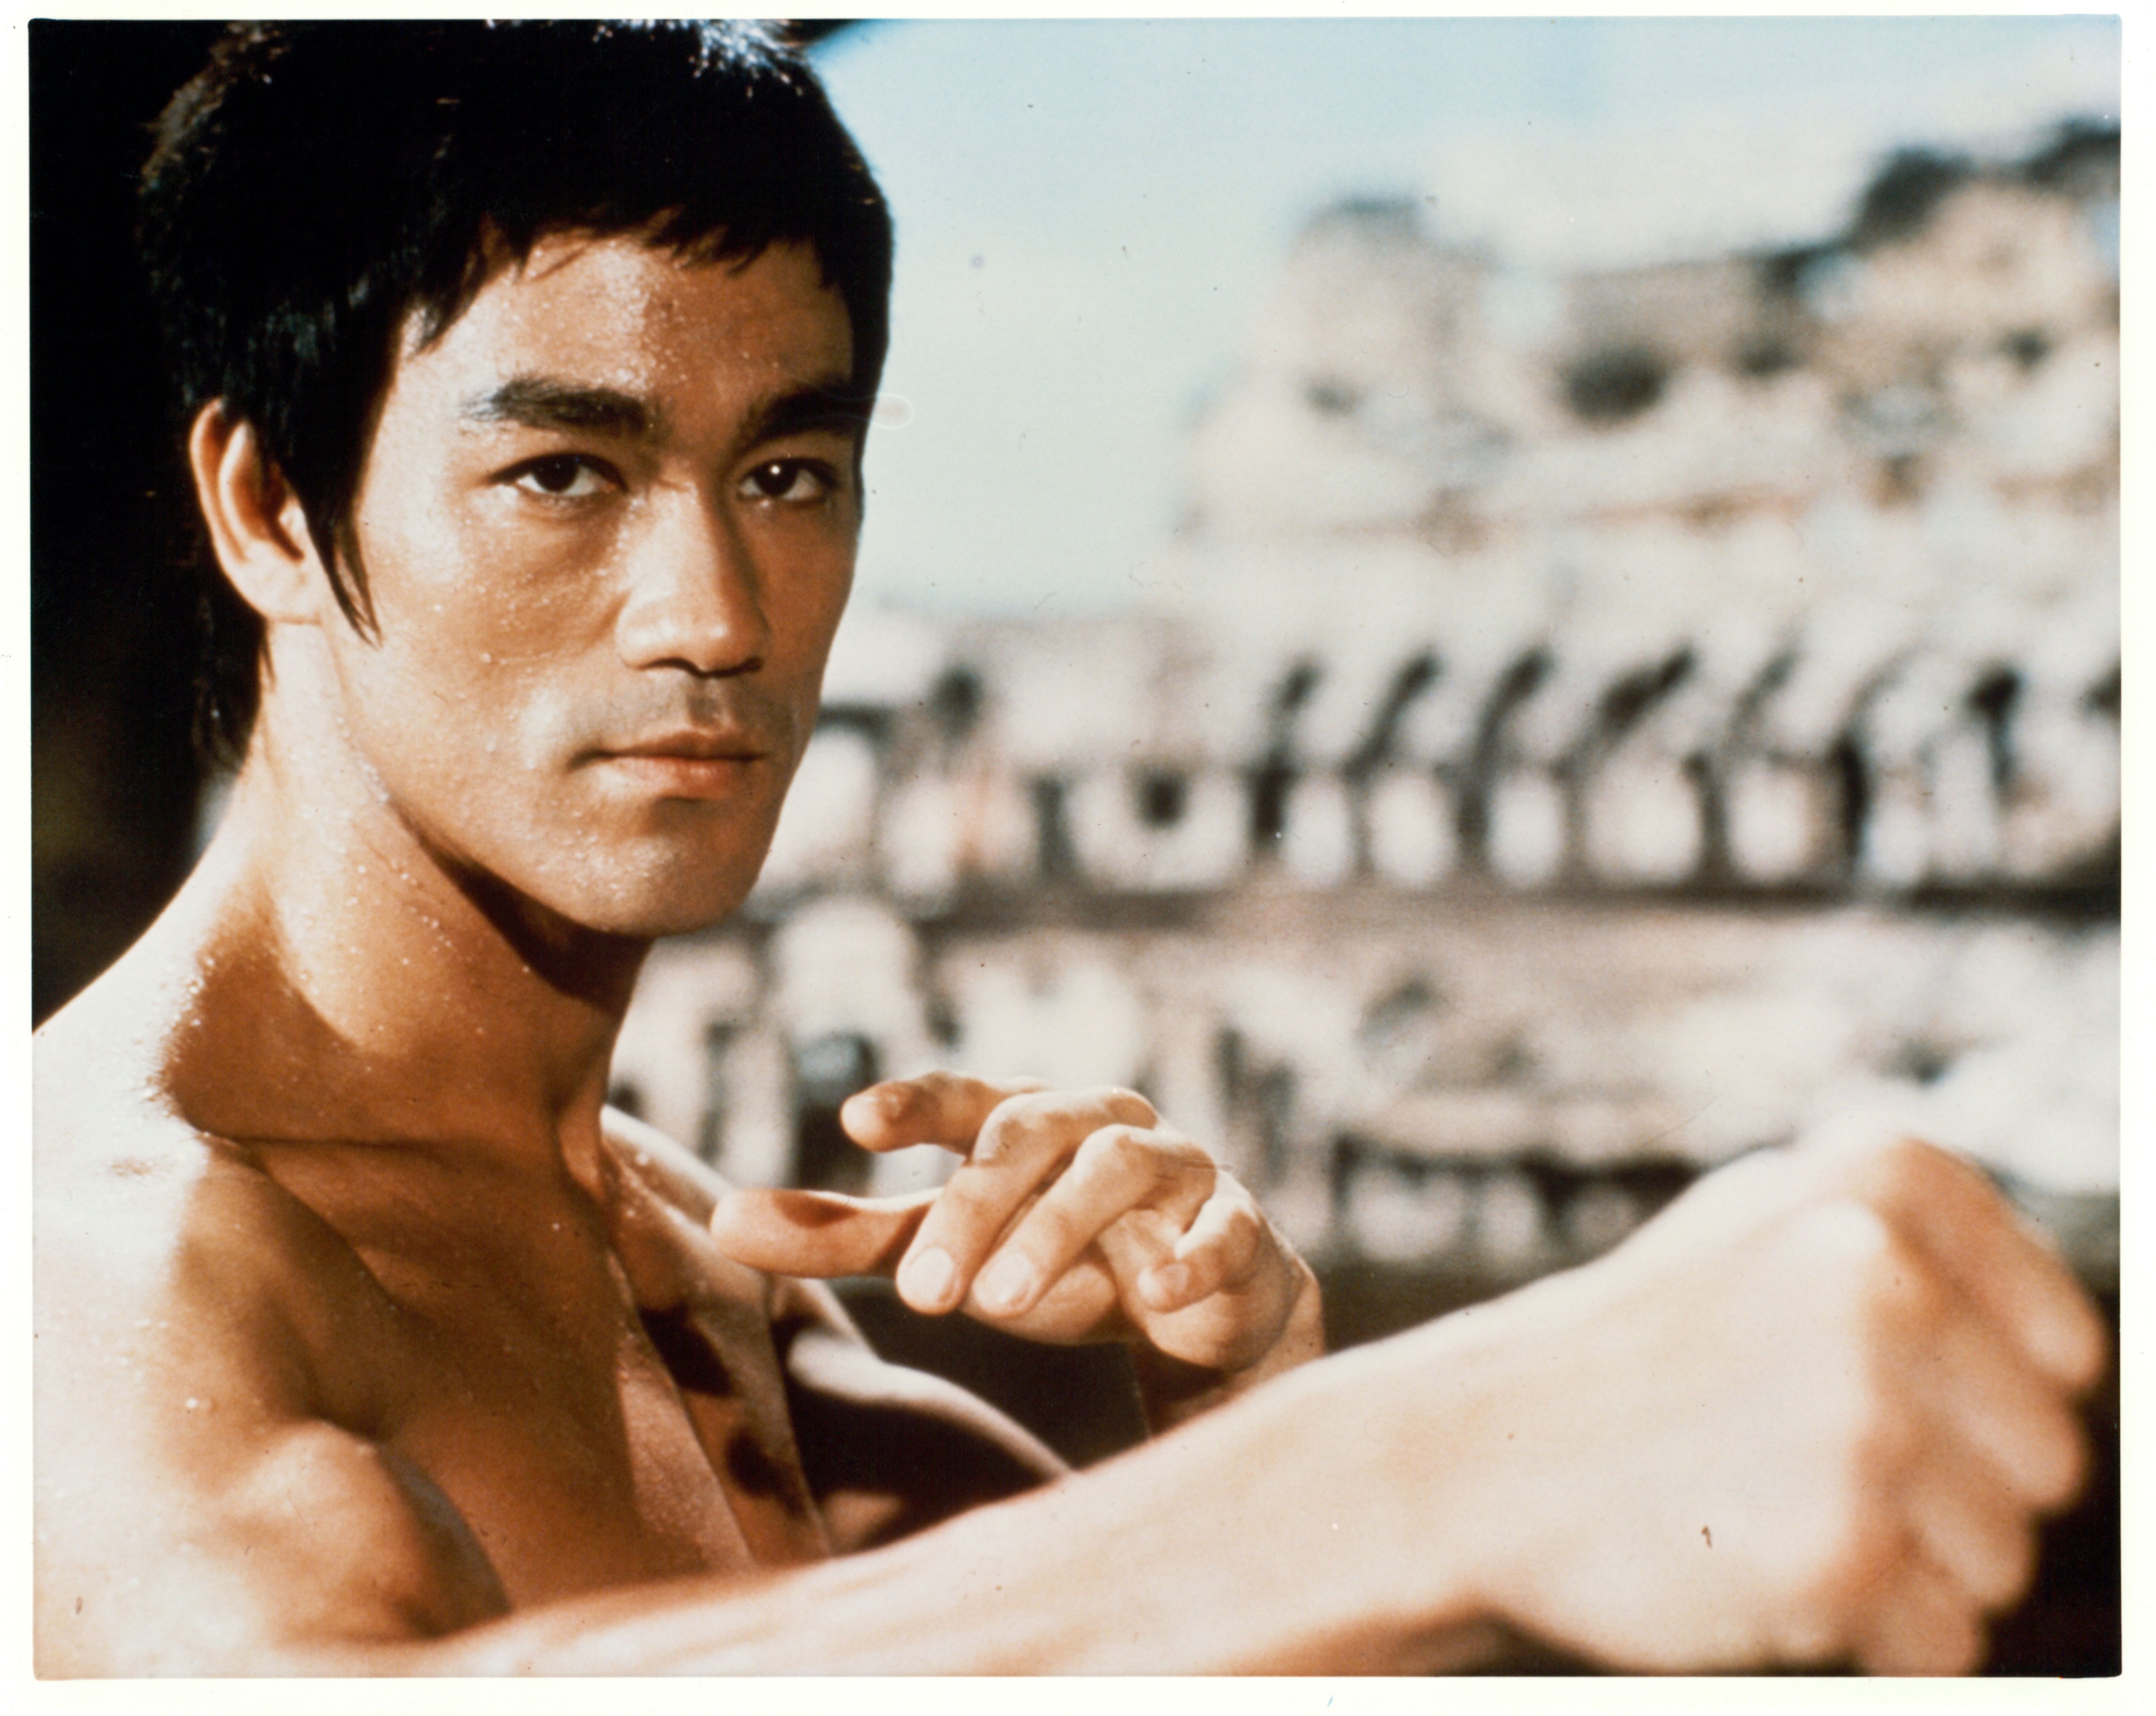 Bruce Lee looking away from the camera, shirtless, with his arms slightly outstretched